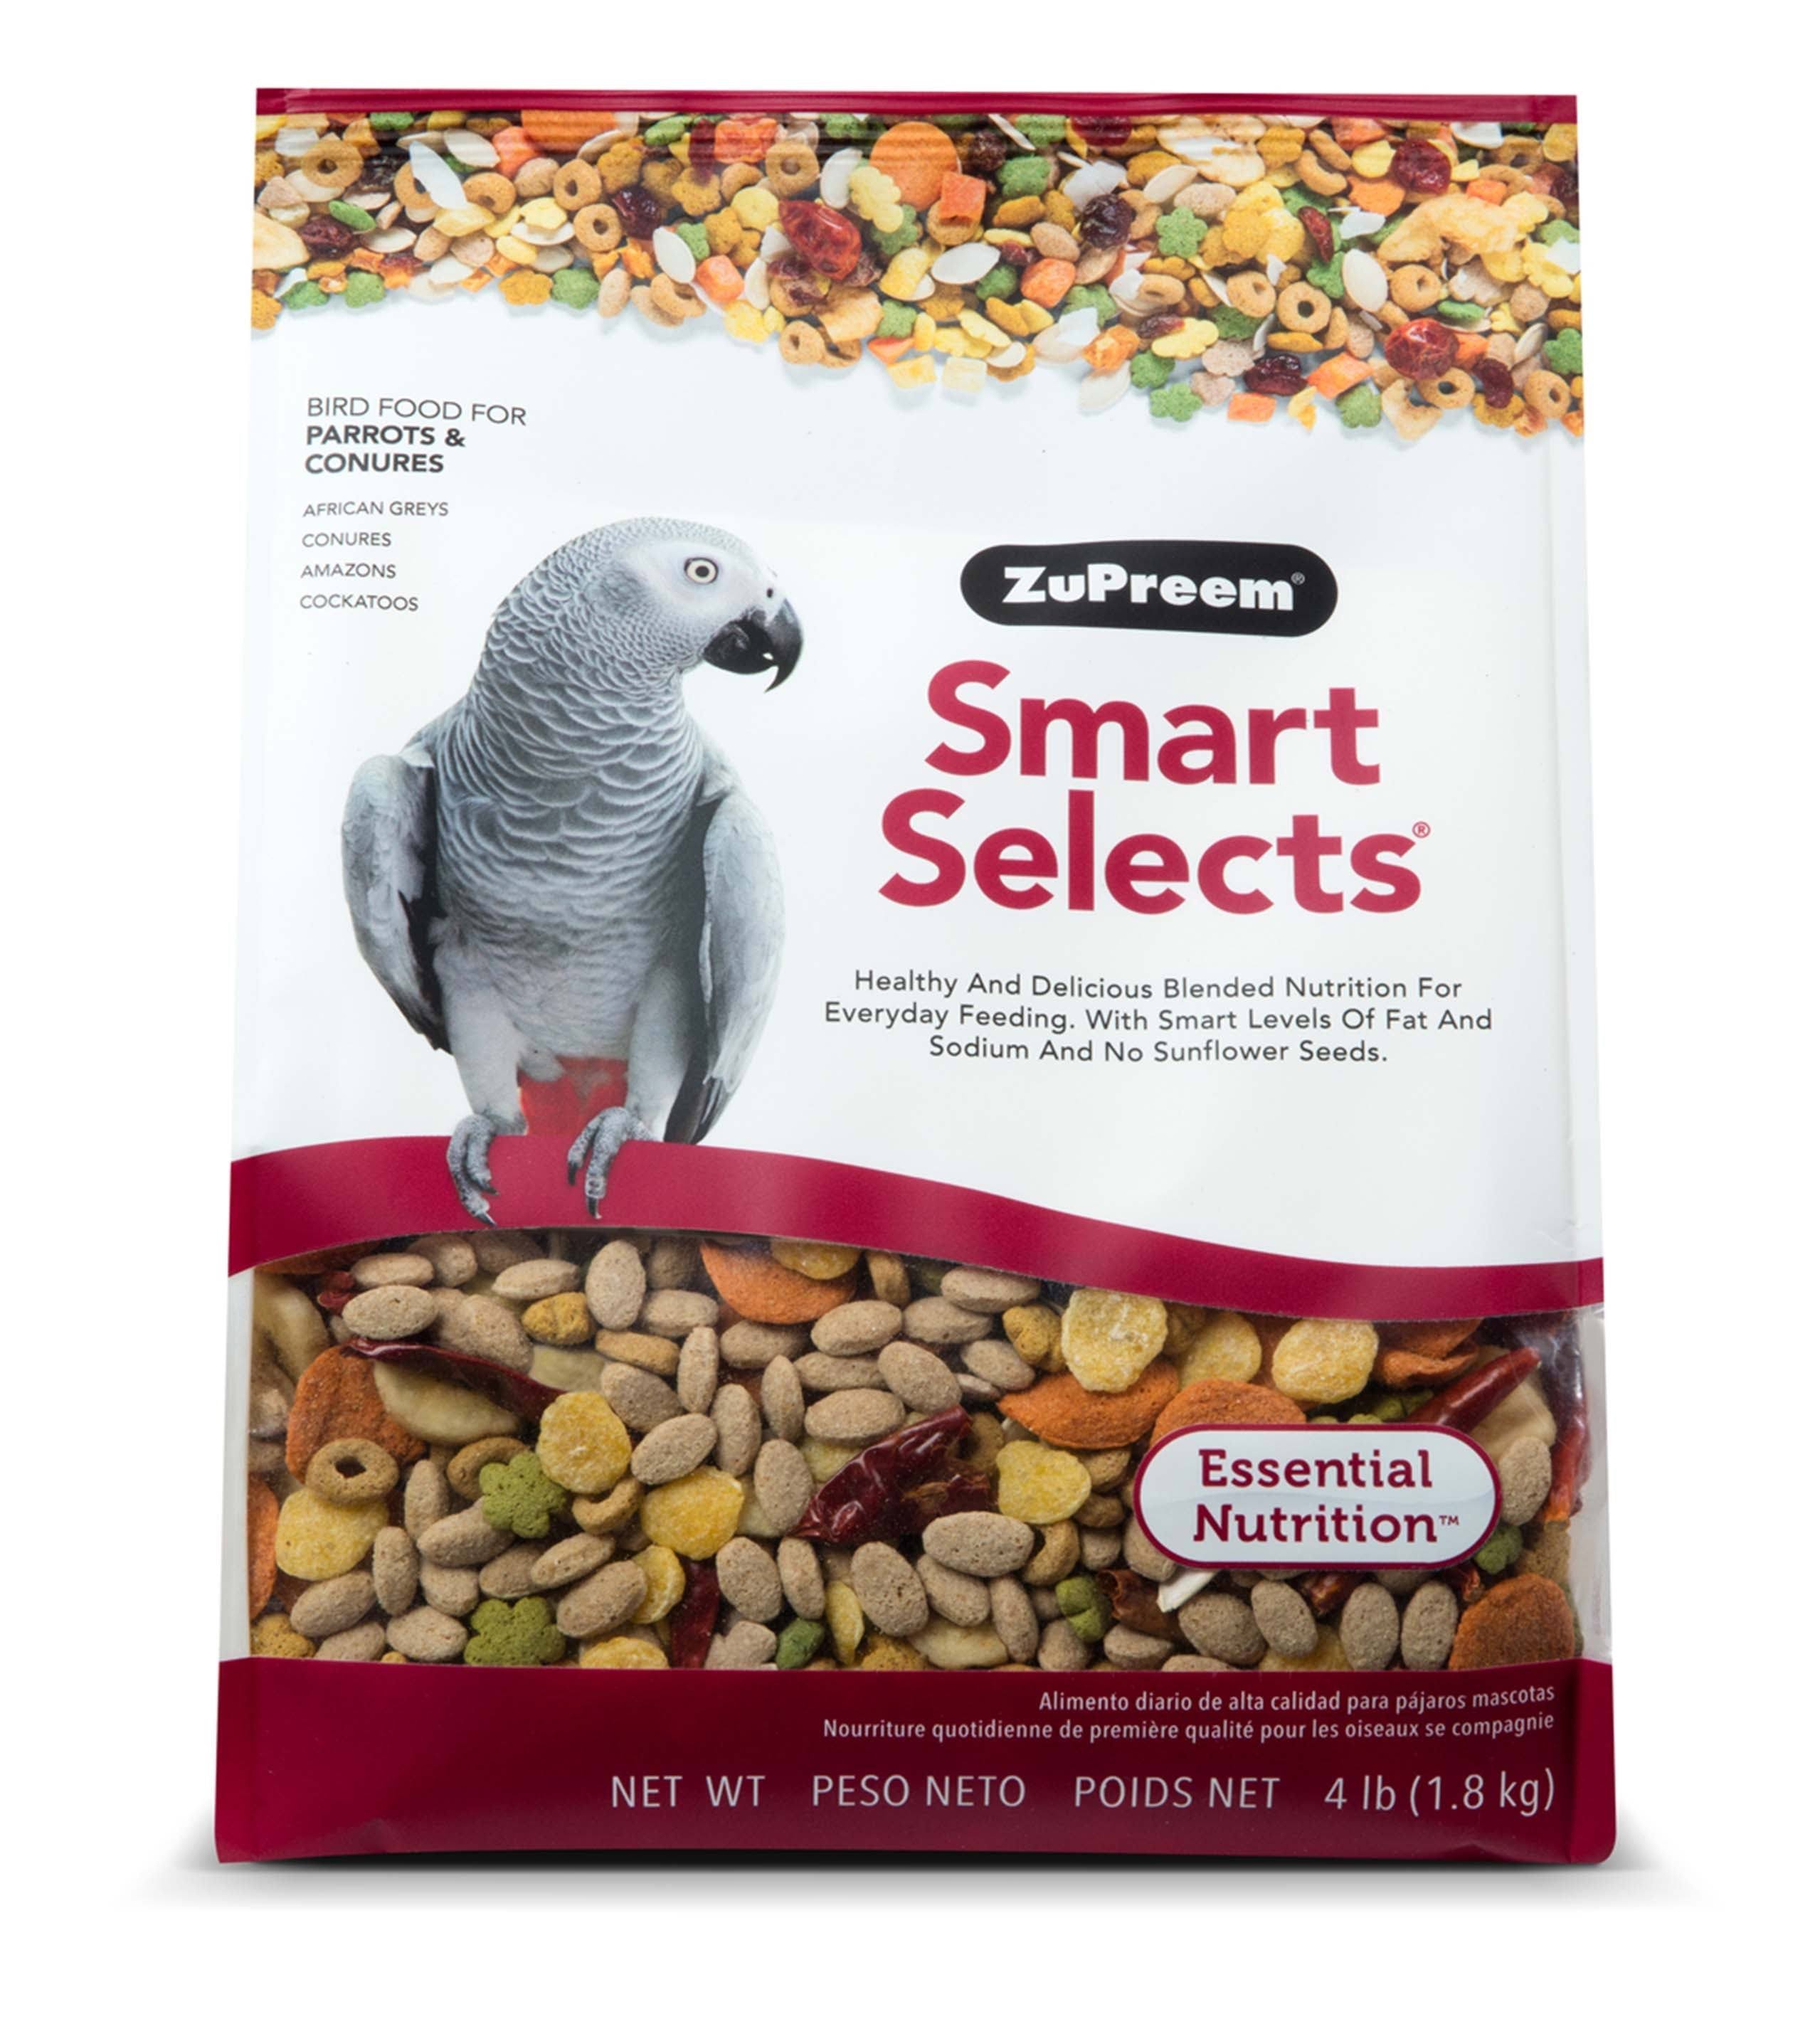 ZuPreem Smart Selects Parrot and Conure Bird Food - 4lb